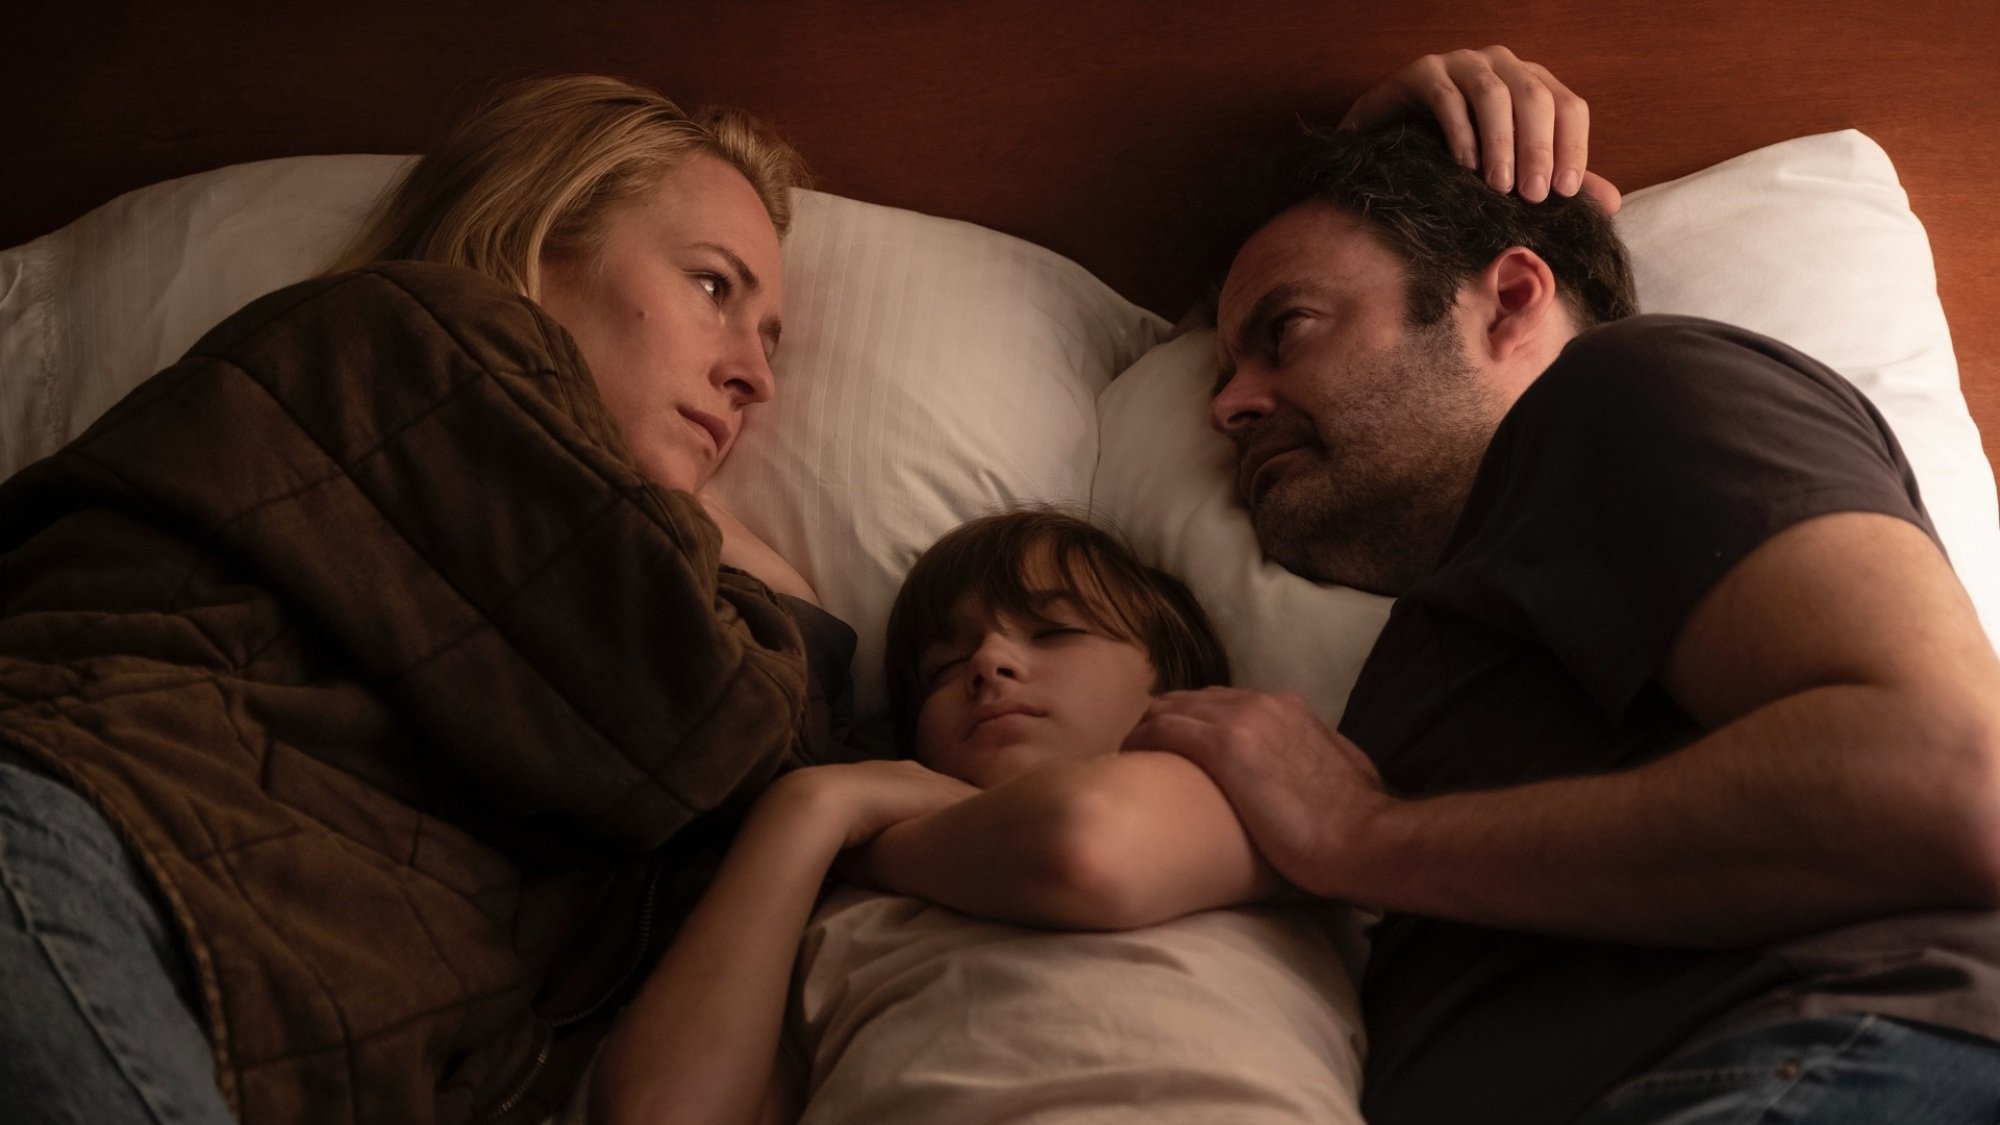 Sally Reed and Barry Berkman lie on a bed facing each other with their son John between them.